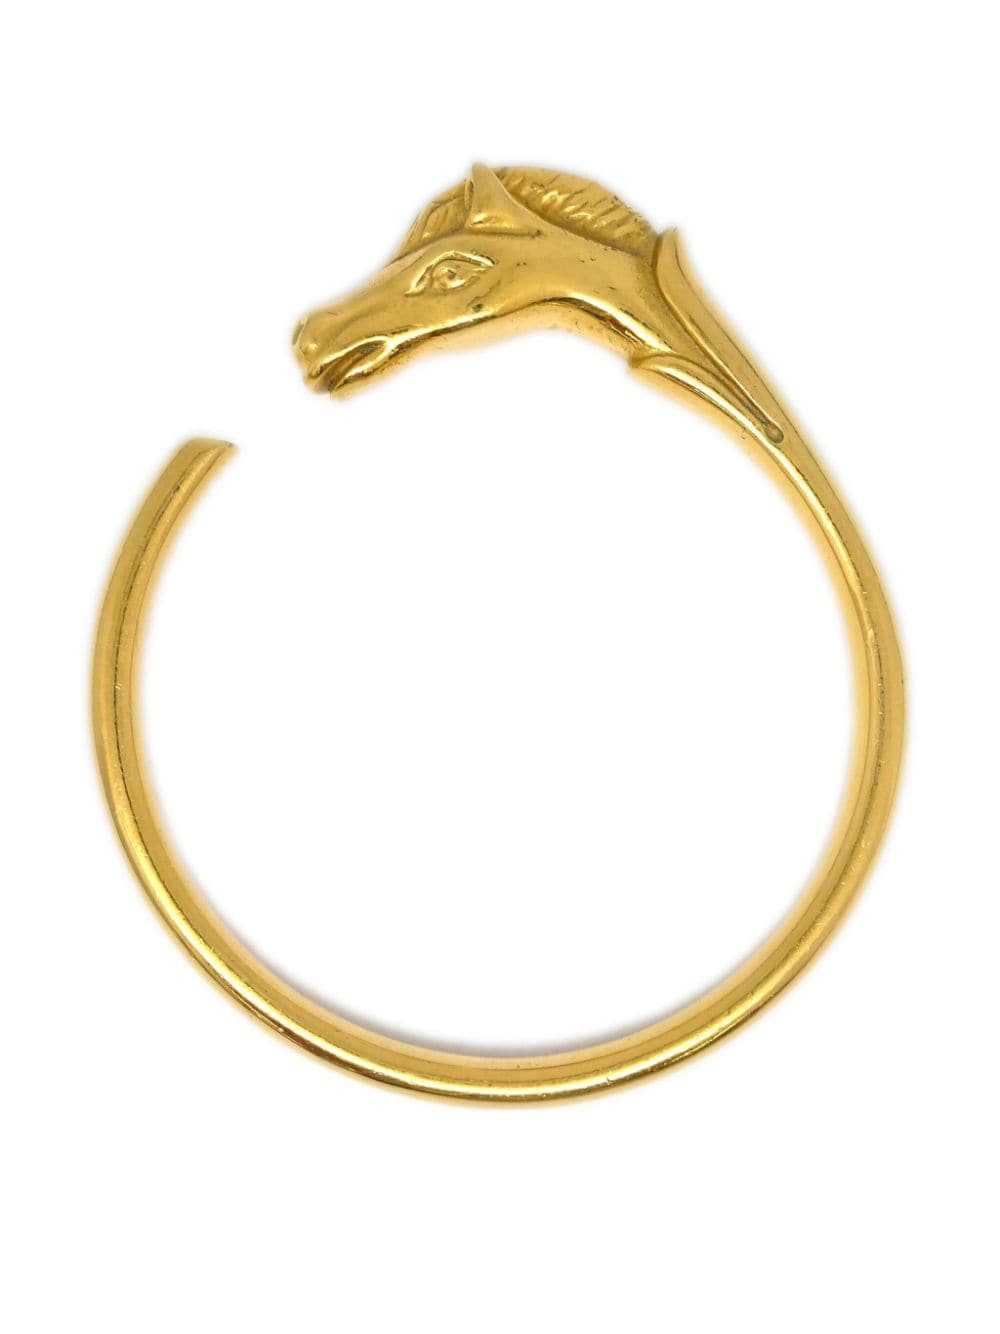 Hermès Pre-Owned 1990-2000 Cheval cuff - Gold - image 2